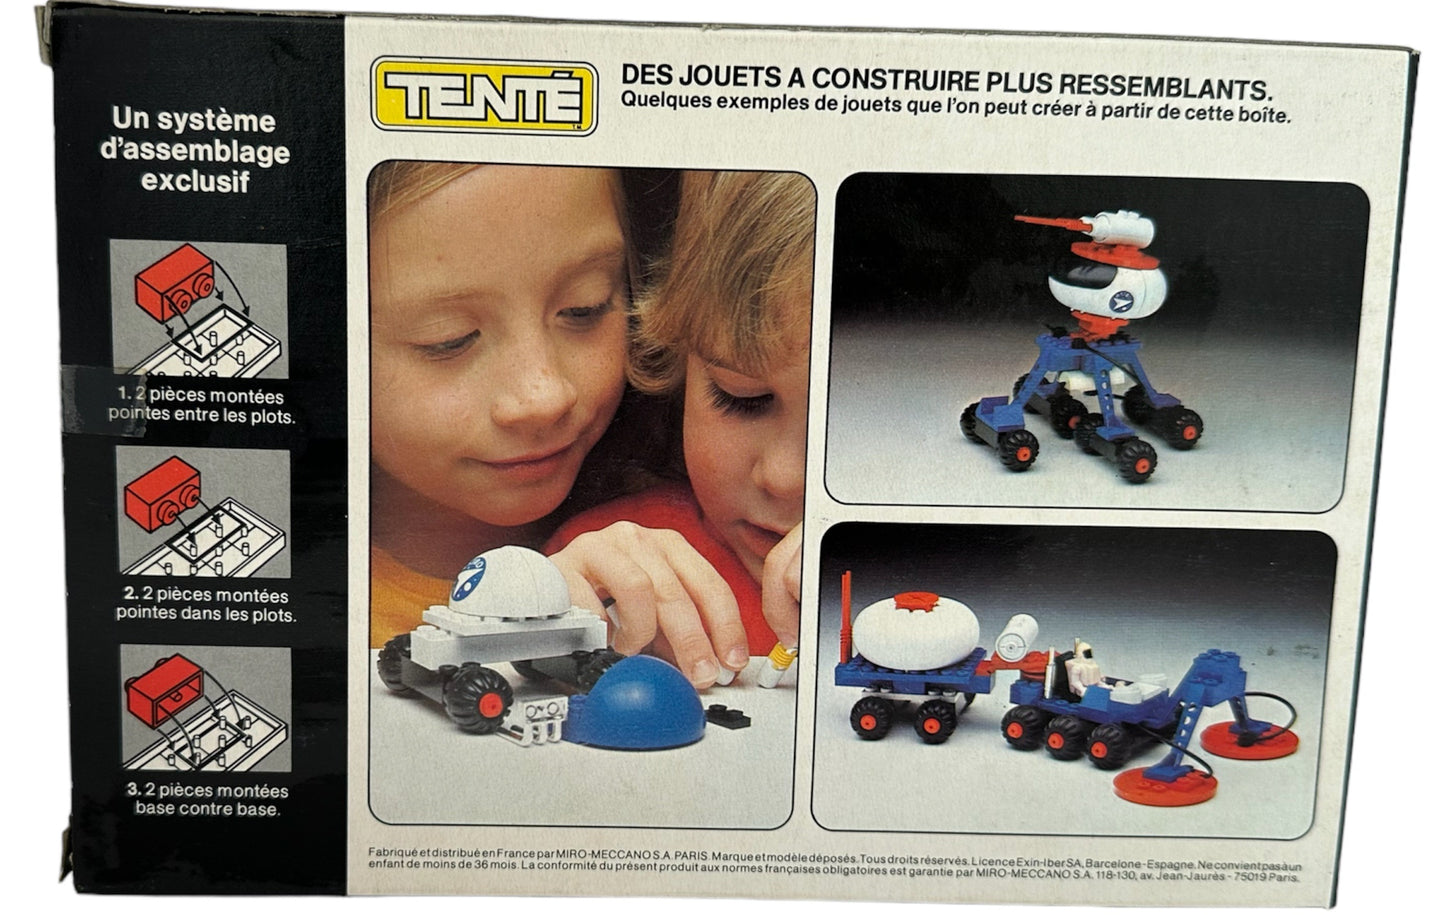 Vintage 1970's Tente Astro Radar Building Blocks Toy Set No. 590720 - A Construction Set By Denys Fisher - Factory Sealed Shop Stock Room Find